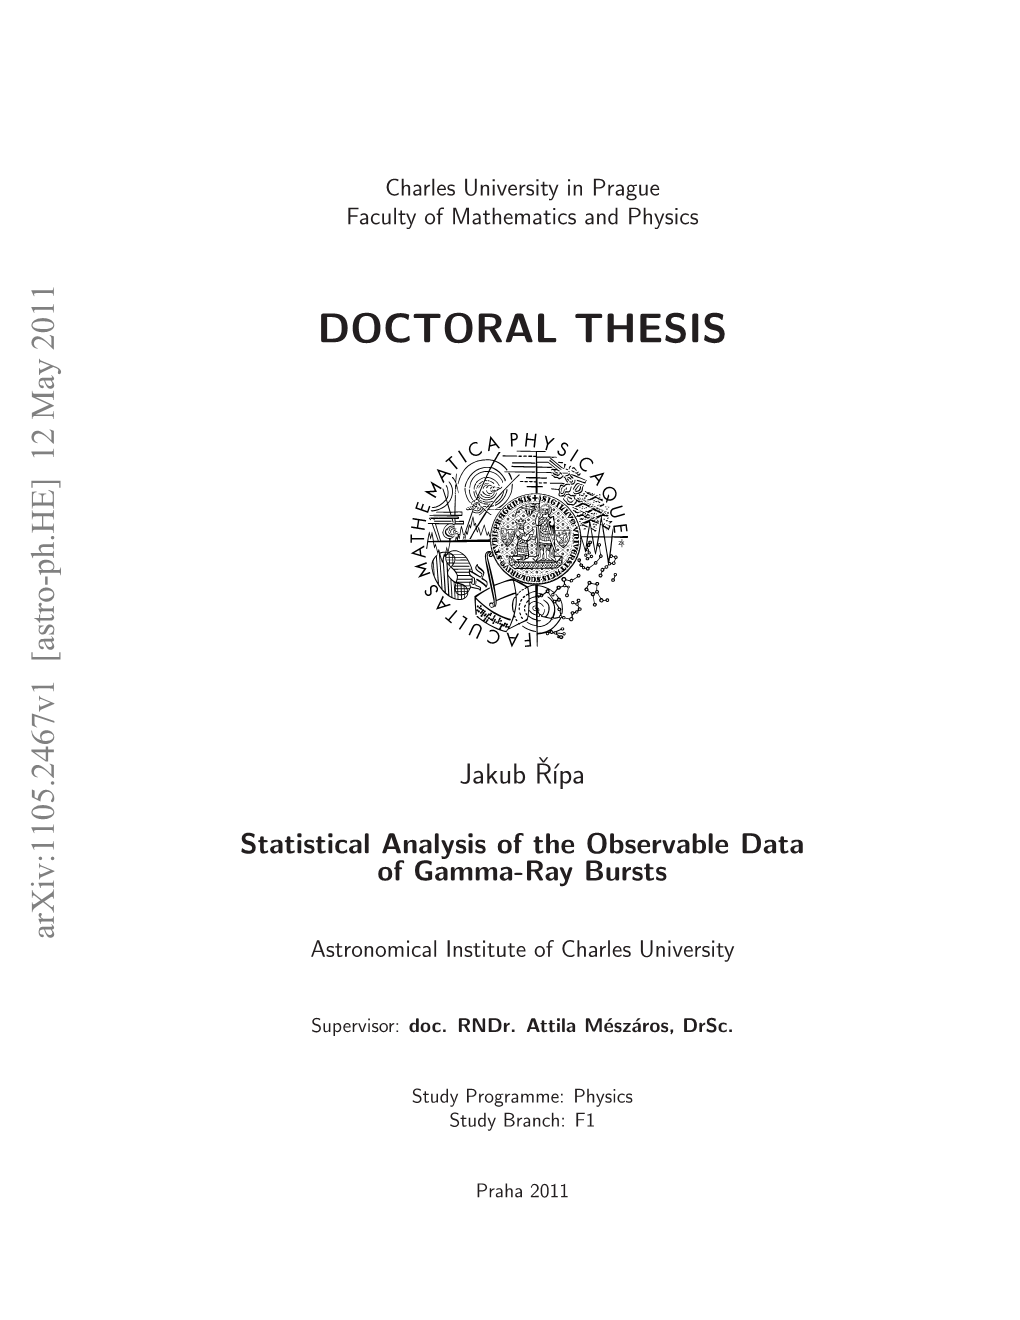 Doctoral Thesis, Charles University in Prague, Faculty of Mathematics and Physics